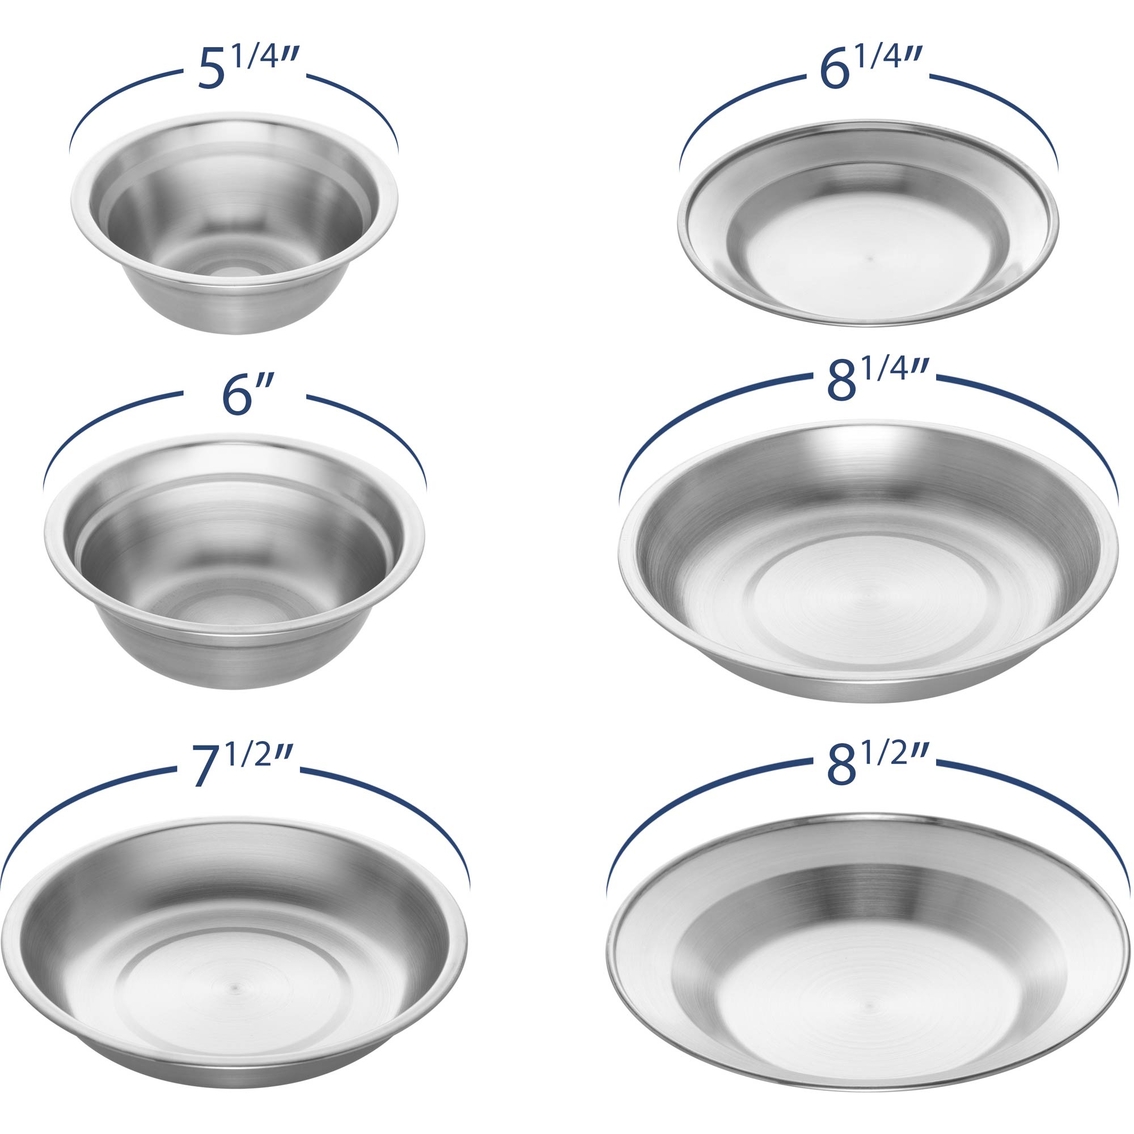 Wealers Stainless Steel Plates and Bowls Camping Set 24 pc. - Image 2 of 6